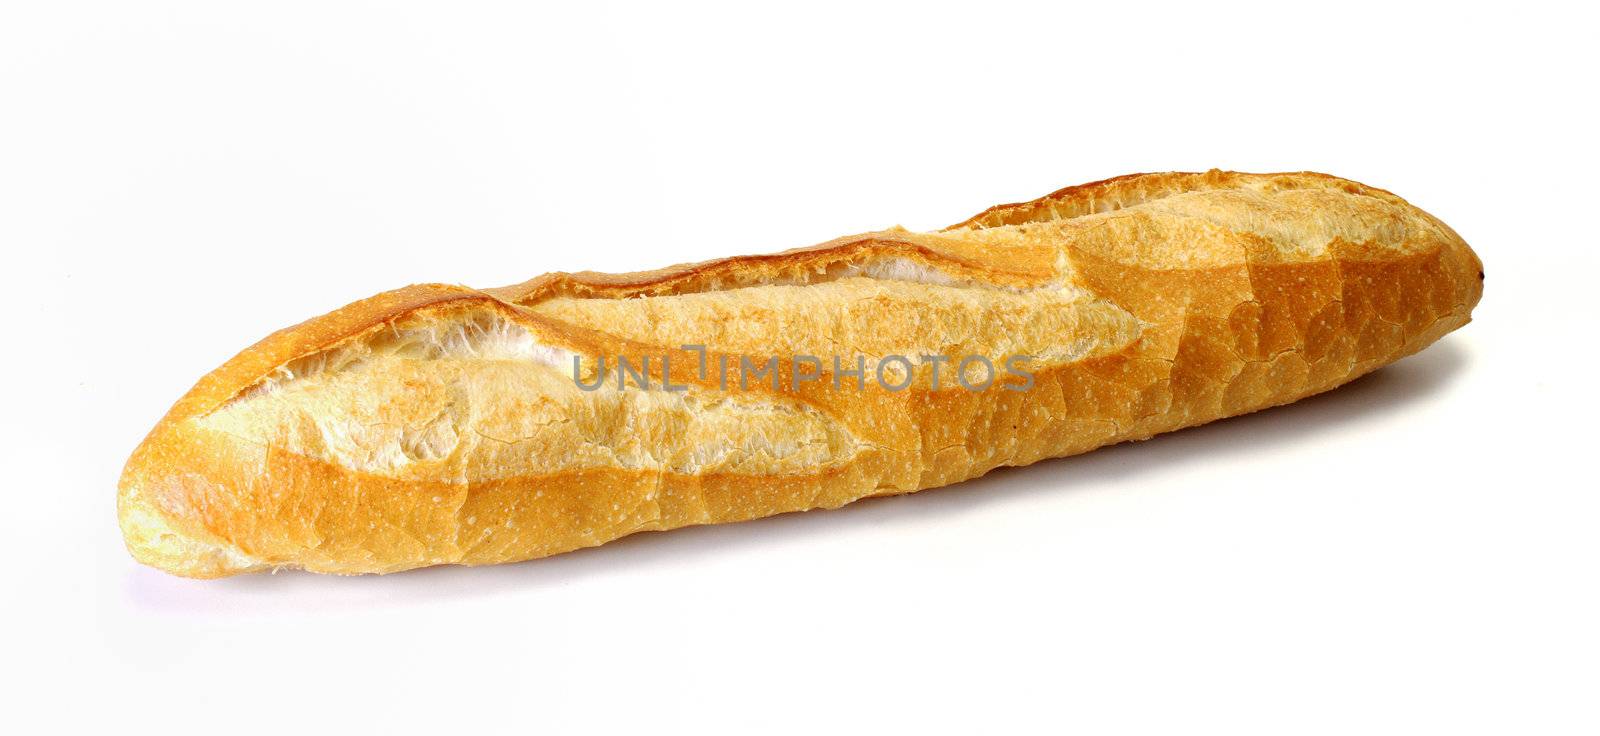 long loaf, Baguette on white background  by pixbox77